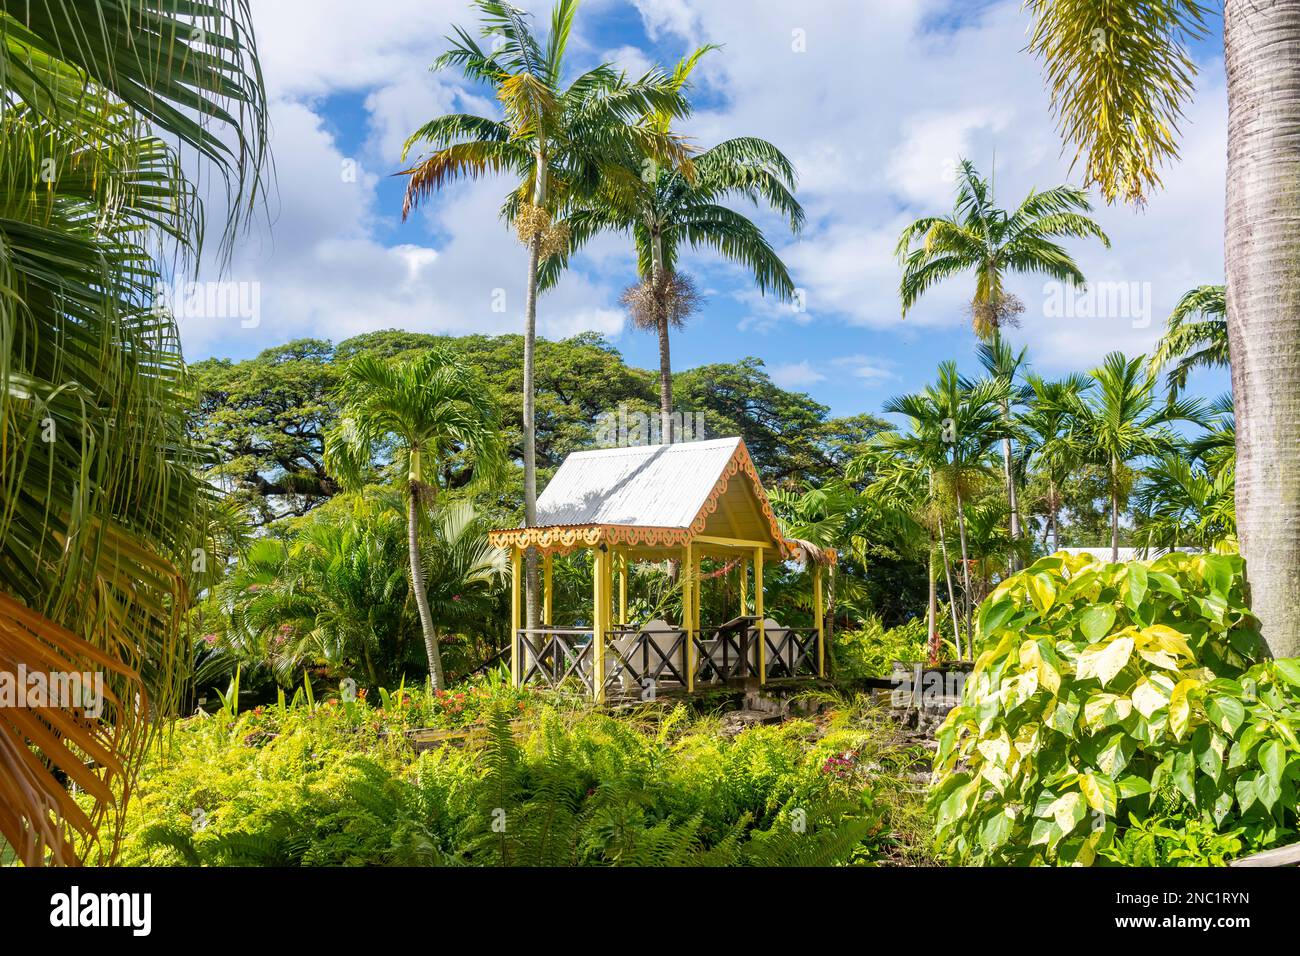 Garden house at Romney Manor (1626) plantation estate house, Old Road Town, St. Kitts, St. Kitts and Nevis, Lesser Antilles, Caribbean Stock Photo